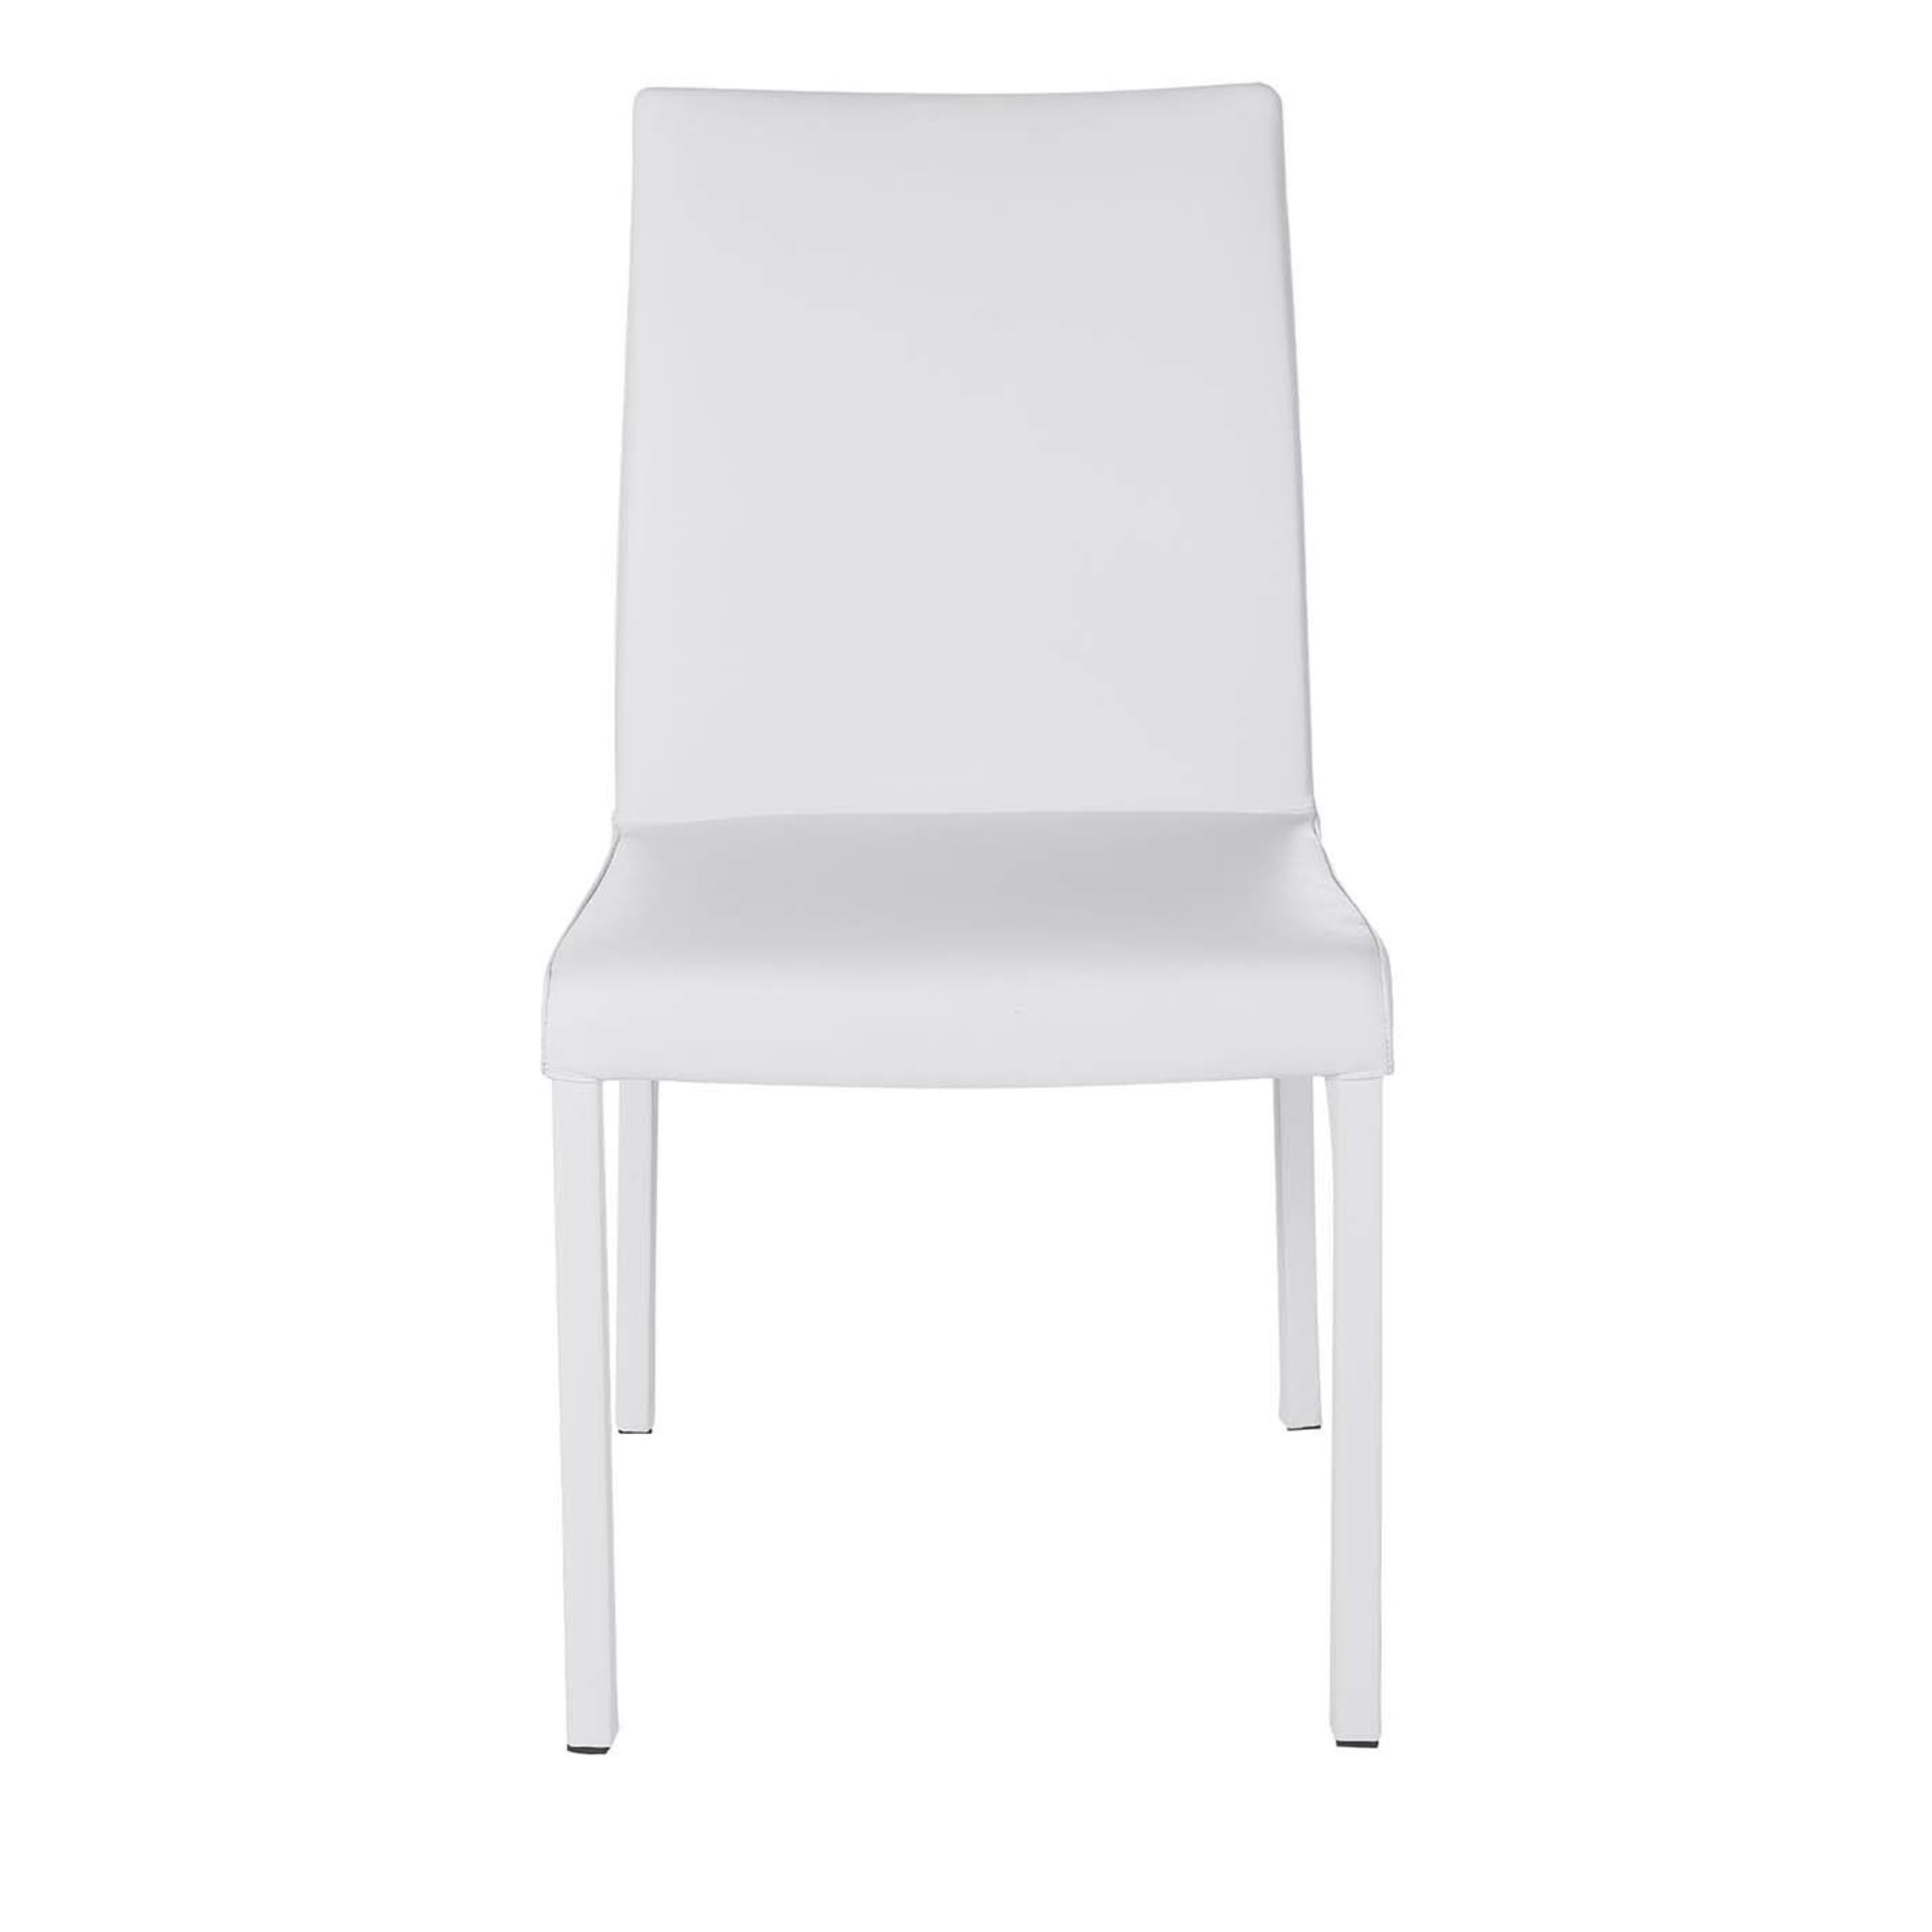 Possagno White Leather XL Chair - Main view